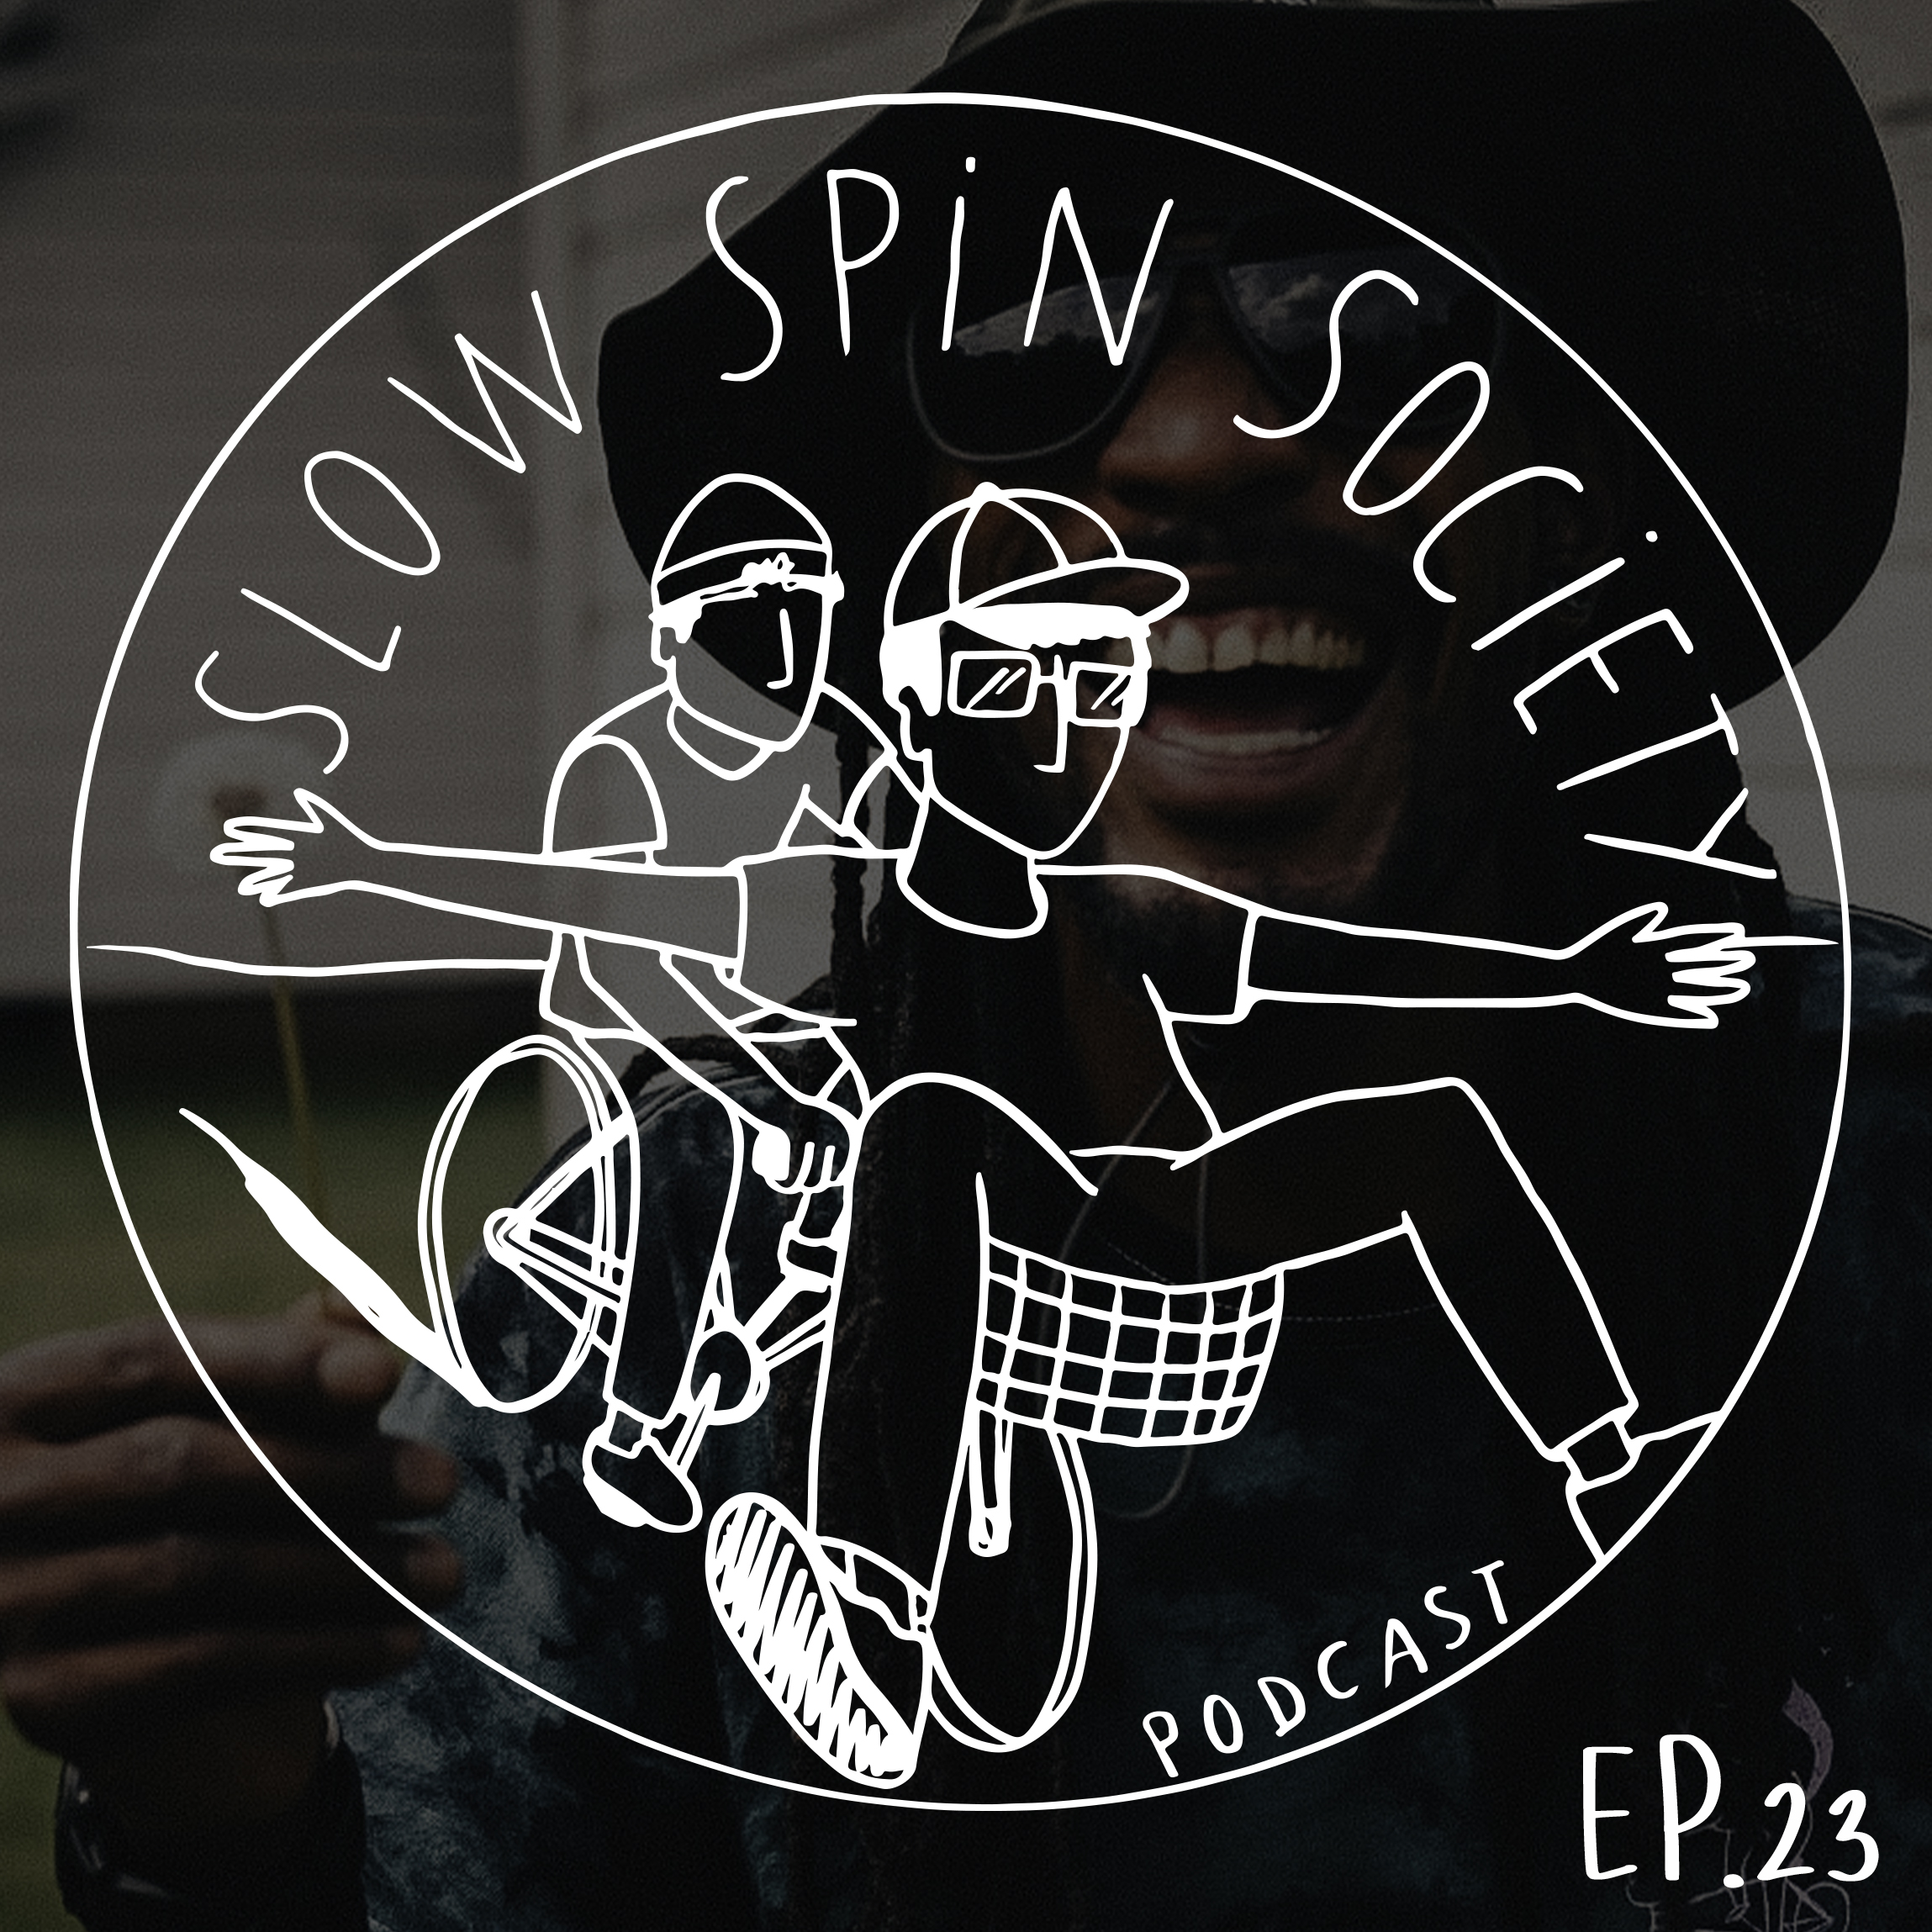 The Slow Spin Society Podcast Ep.23 : Talking Crust Bikes, Paralympics and more with Leo Rodgers